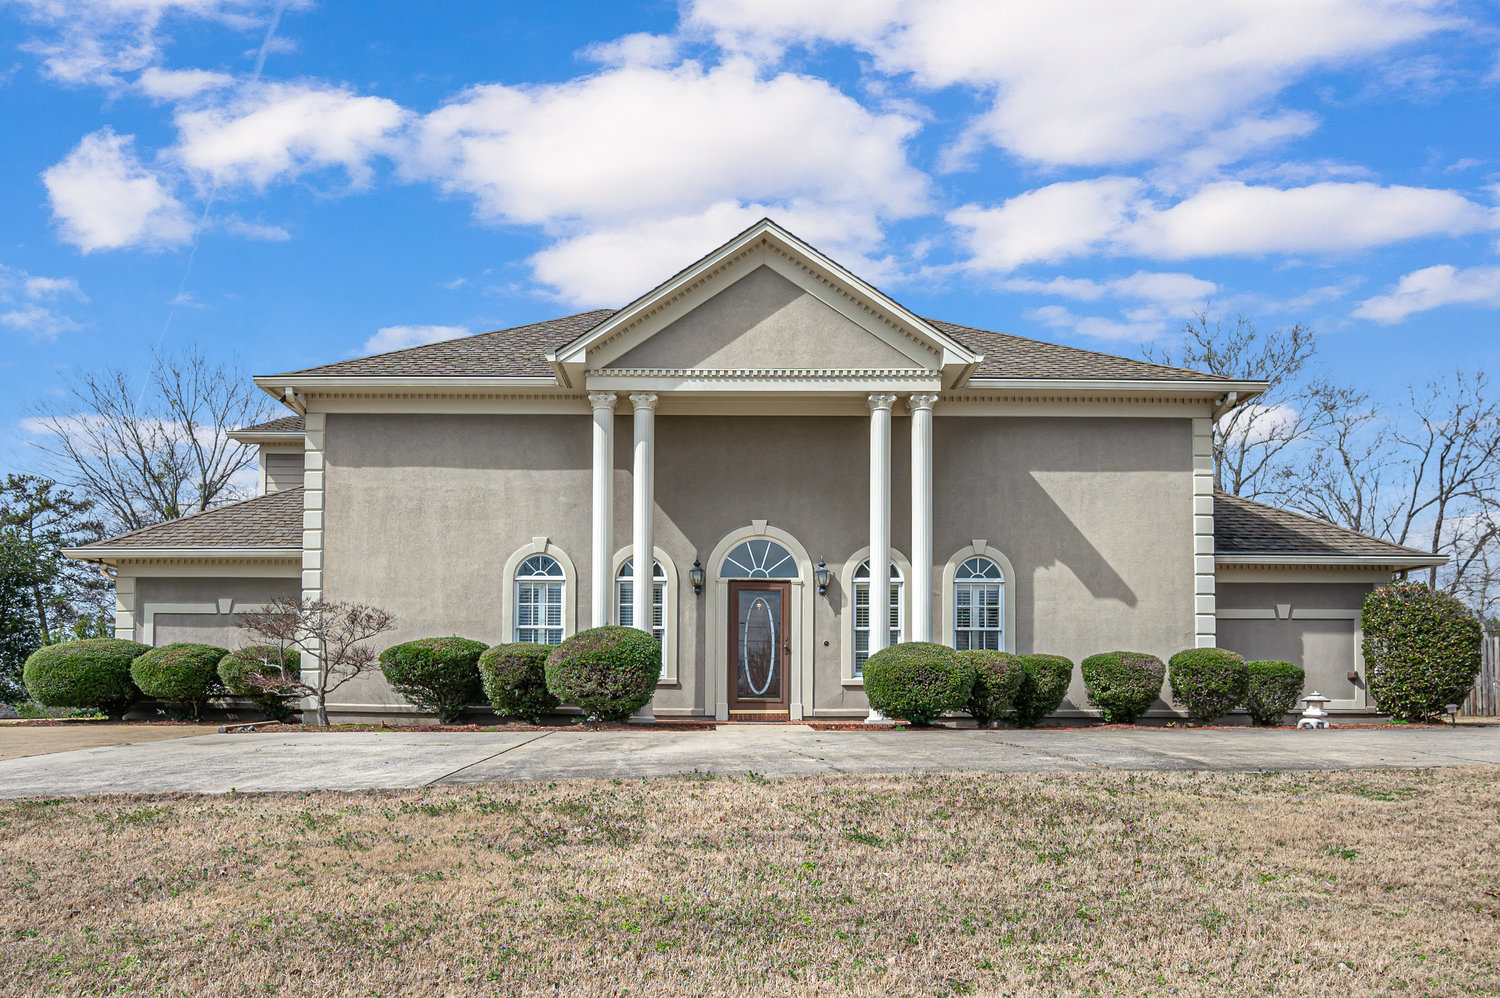 Virtual Tour of Birmingham Metro Real Estate Listing For Sale | 248 Shades Crest Road, Hoover, AL 35226